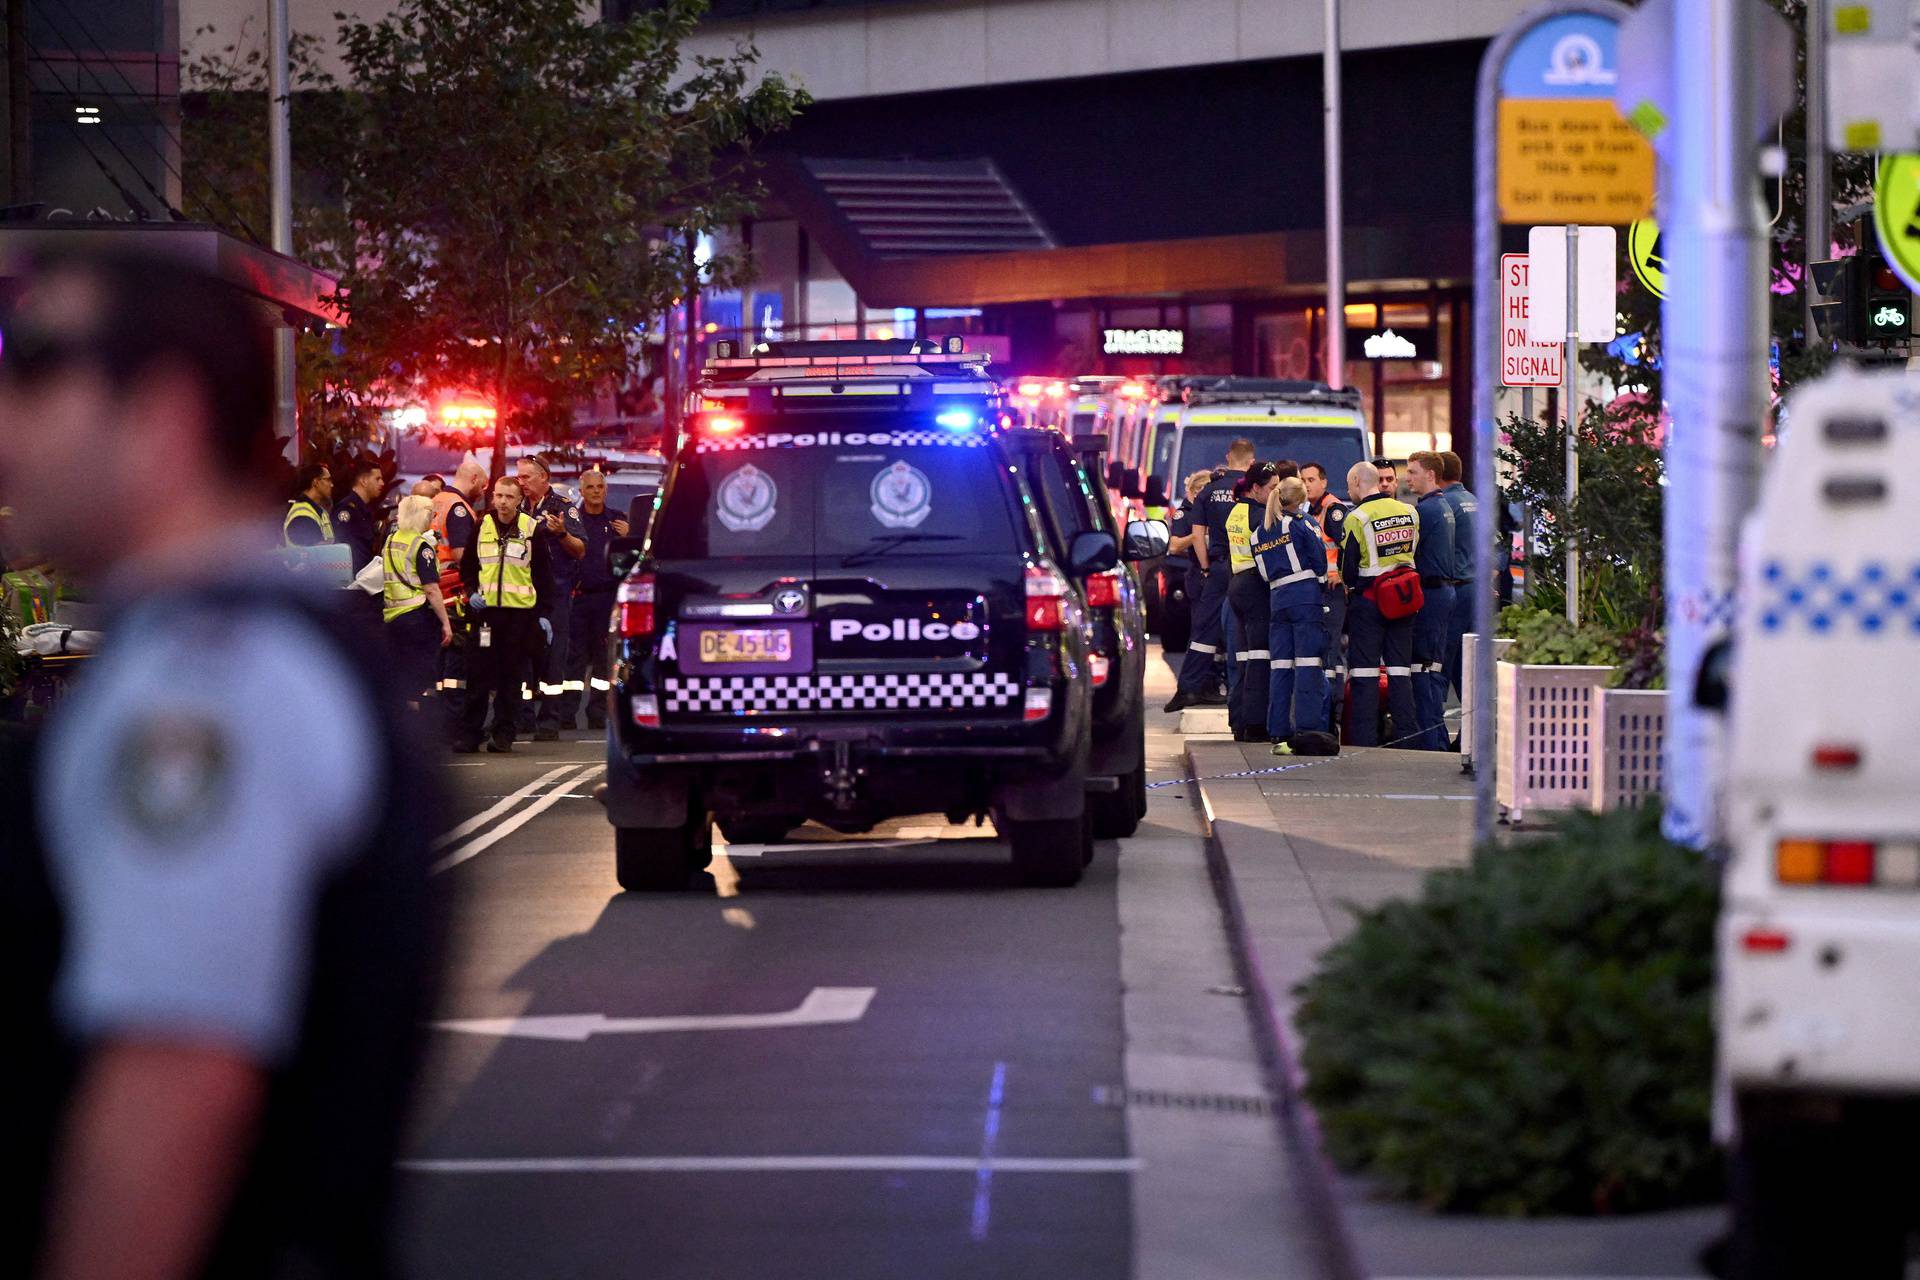 Emergency service workers are seen at the scene at Bondi Junction after multiple people were stabbed inside the eastern suburbs shopping centre in Sydney